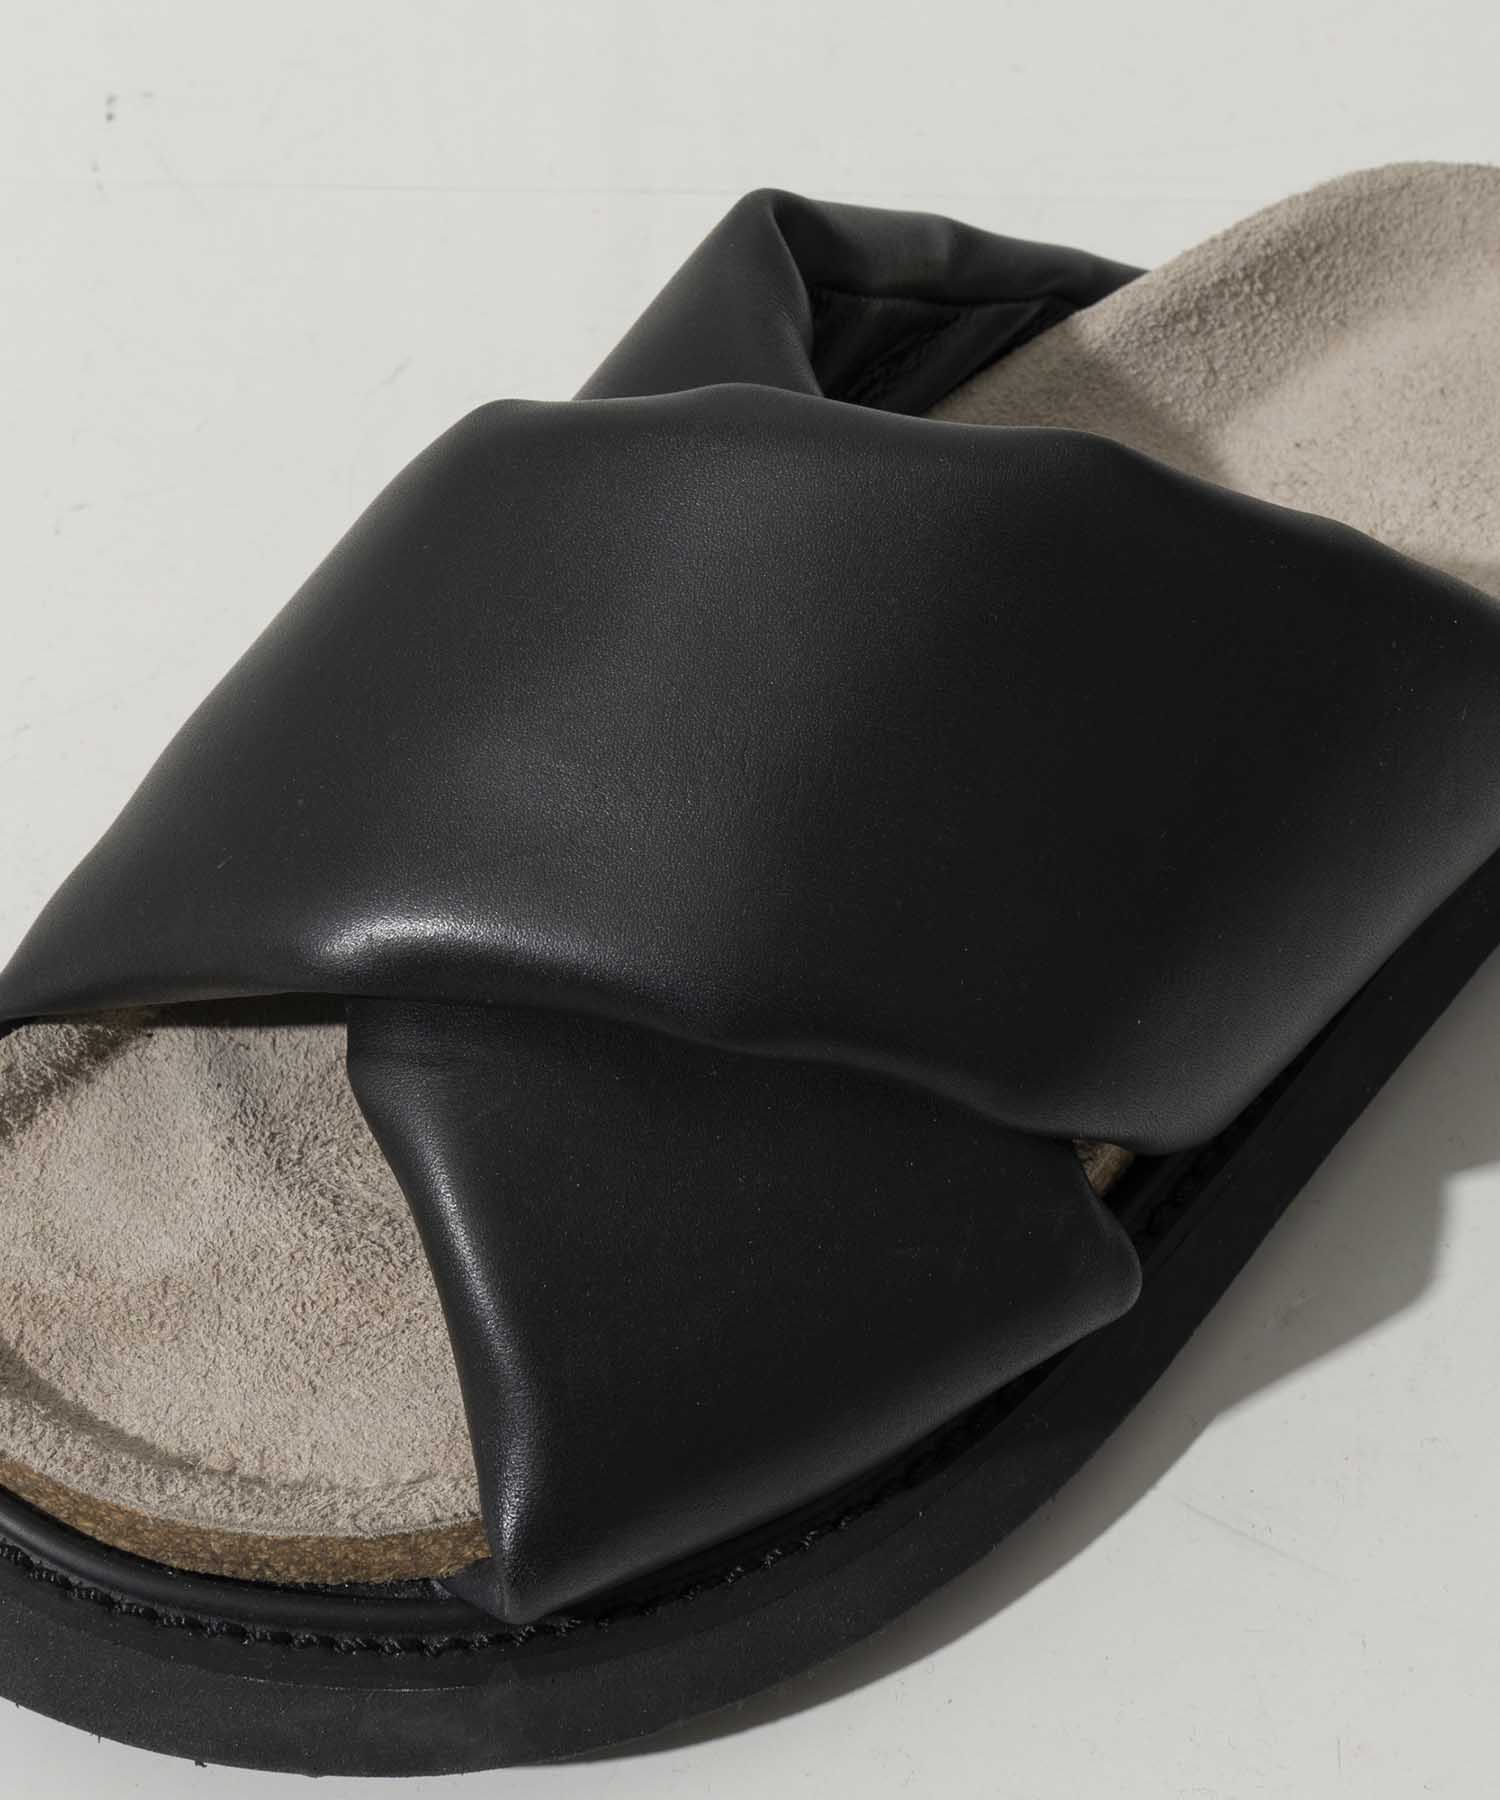 [SALE] [Special Shoes Factory Collaboration] Italian Vibram Sole Cross Strap Sandal Made in Tokyo